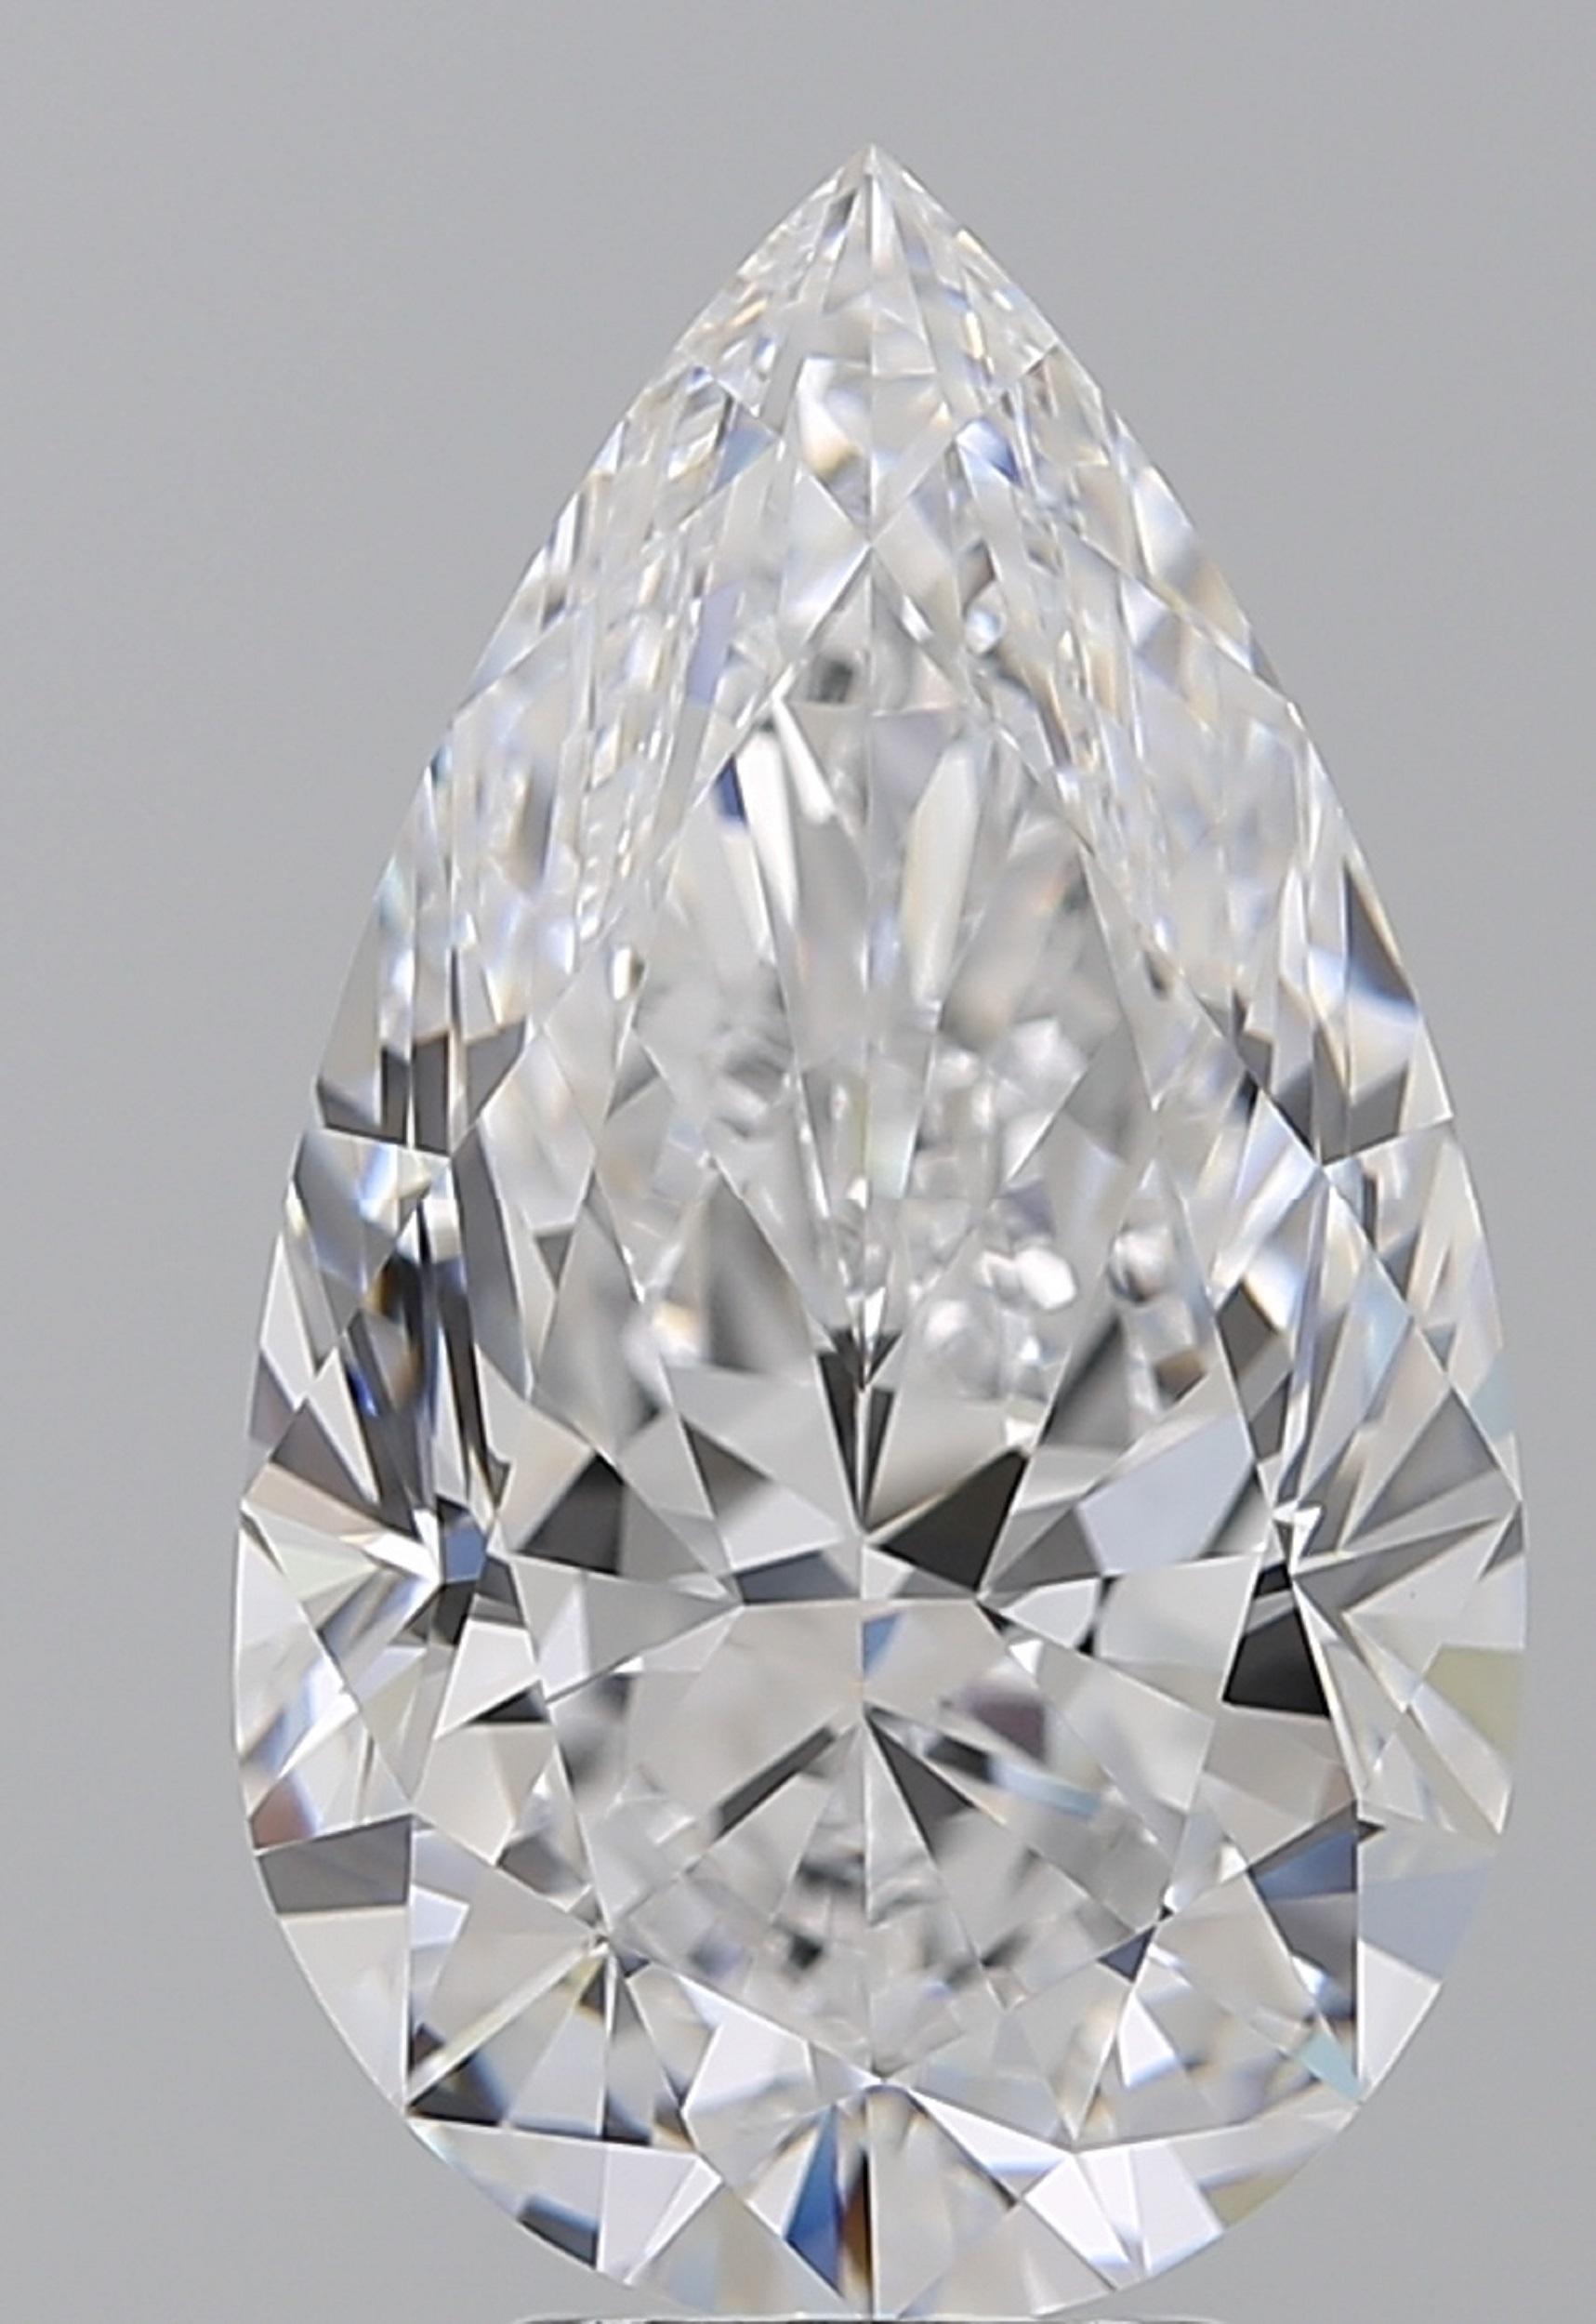 EXCEPTIONAL FLAWLESS GIA Certified 9.16 Carat Pear Cut Diamond 20.21 mm long
EXCELLENT POLISH
EXCELLENT SYMMETRY
NONE FLUORESCENCE 